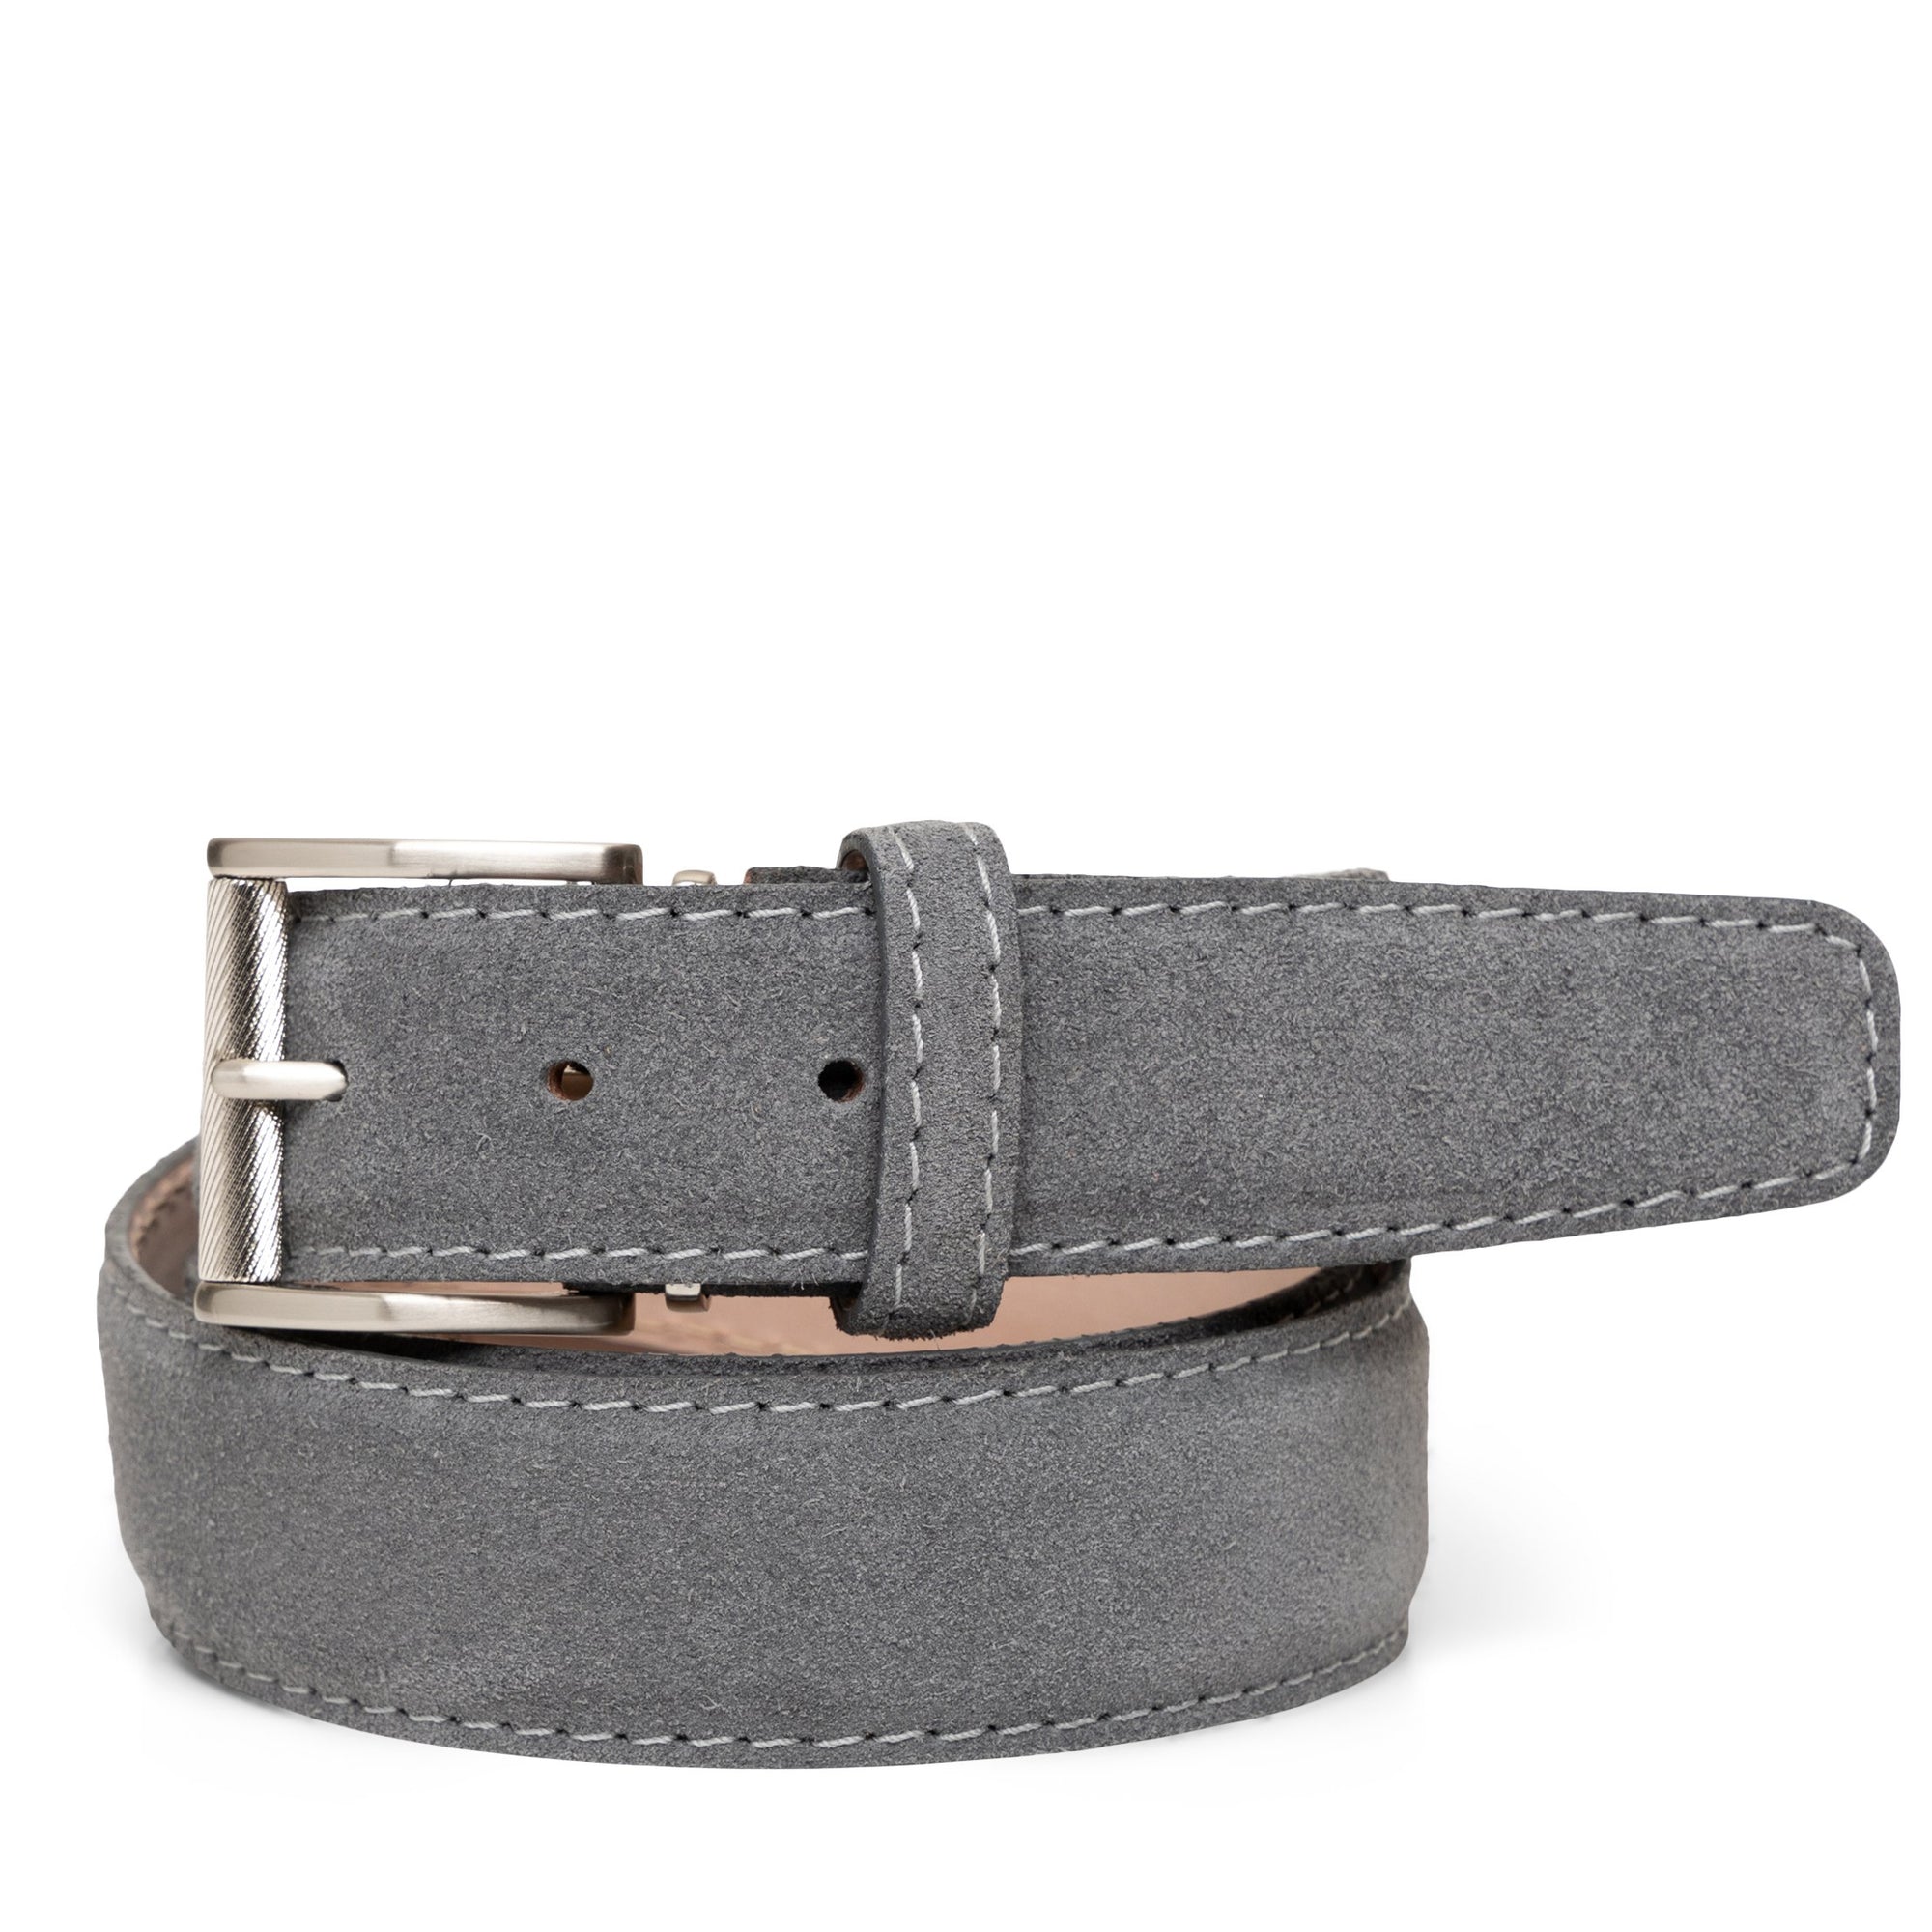 Italian Suede Belt in Charcoal with Grey Stitching by L.E.N. Bespoke